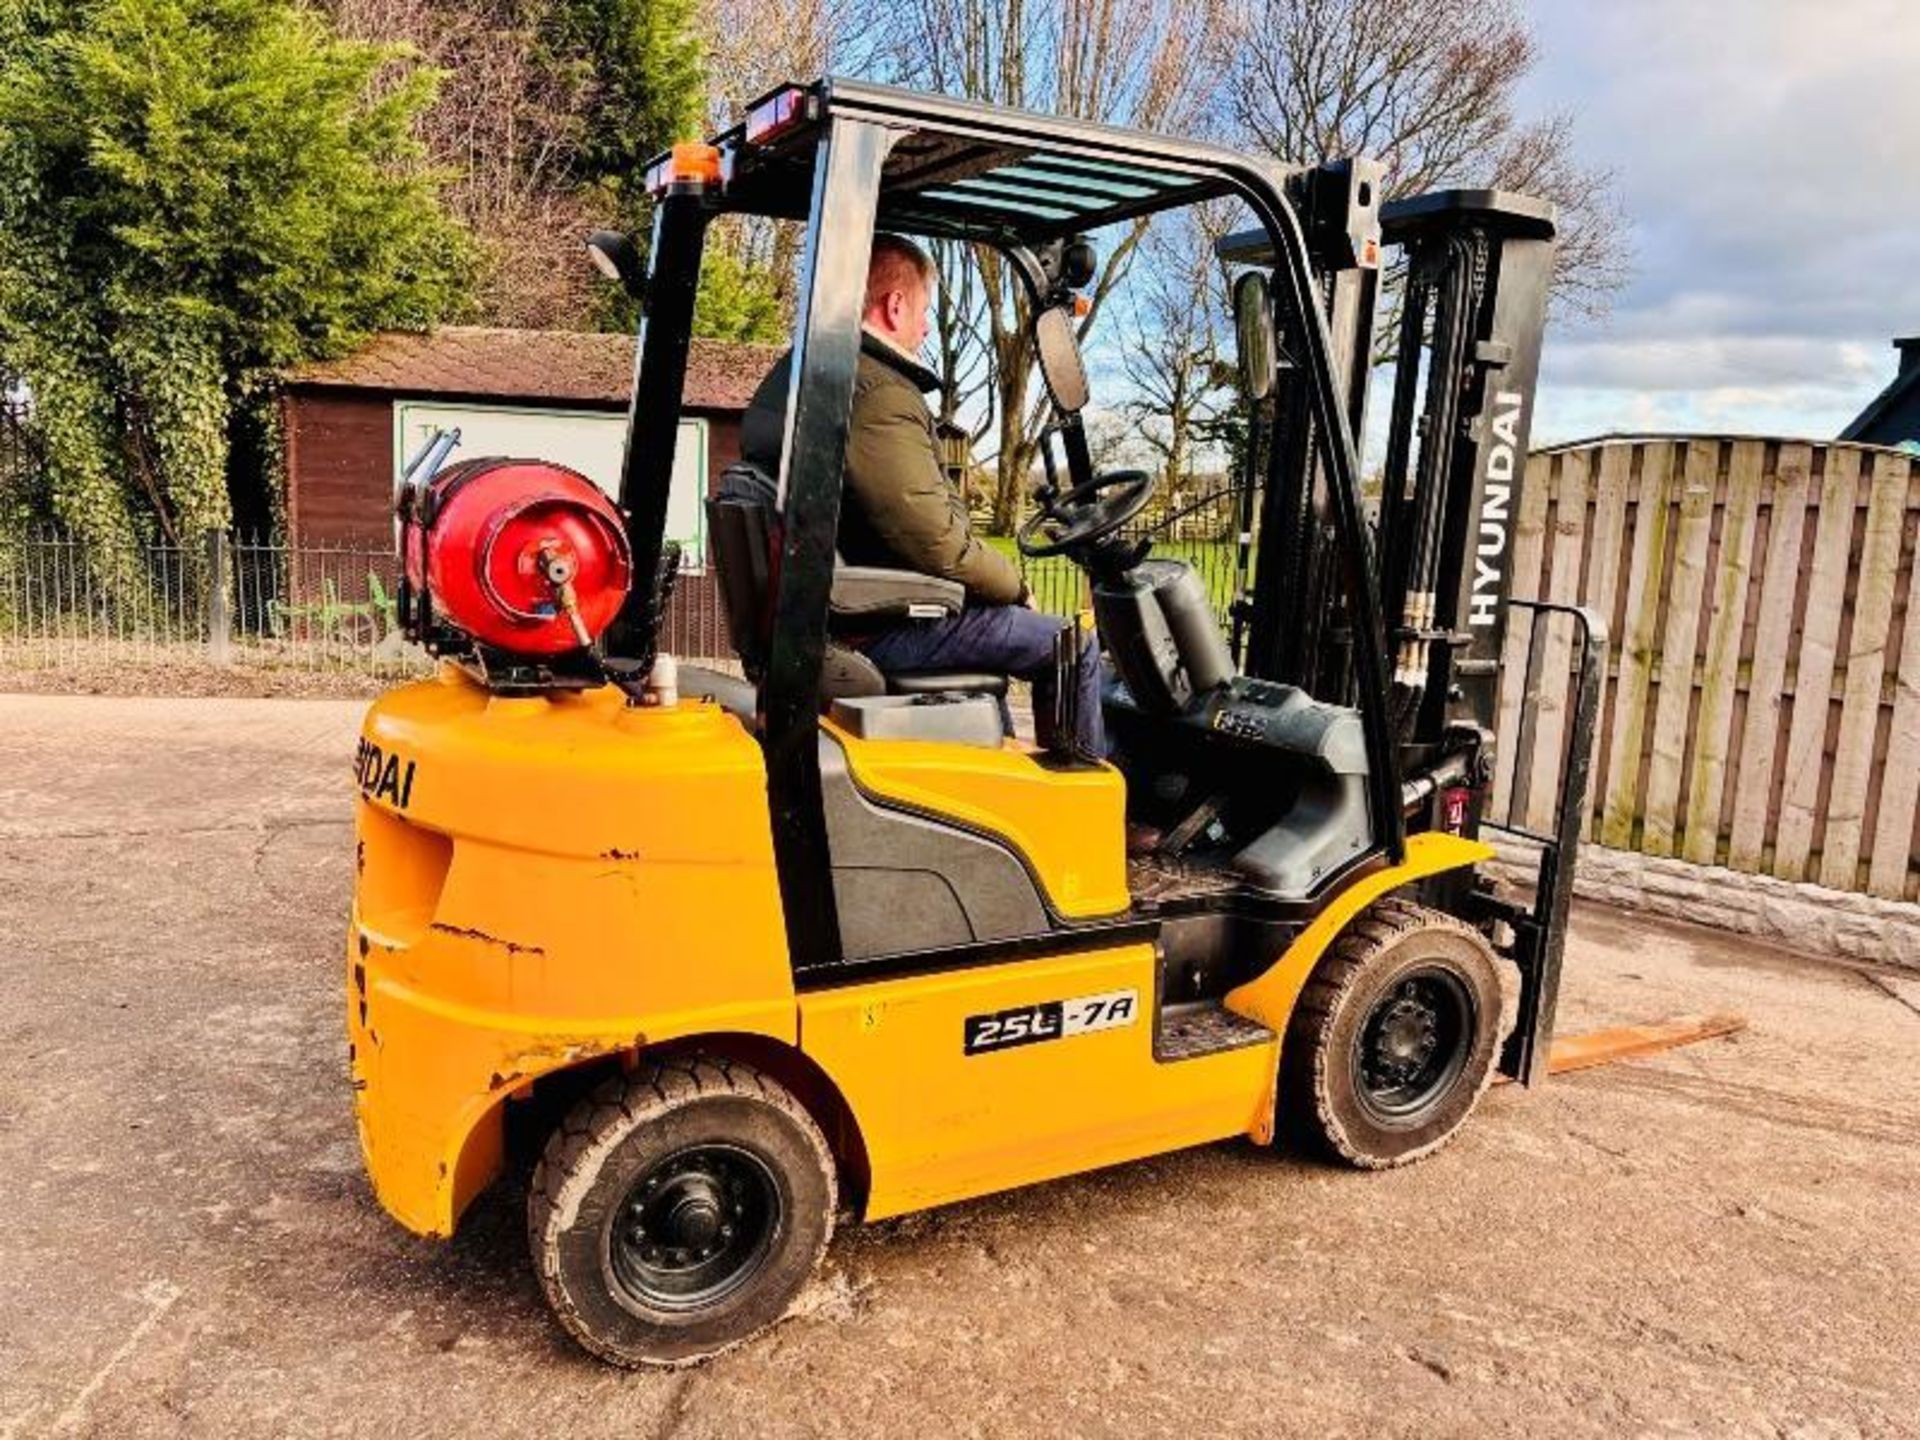 HYUNDAI 25L-7A CONTAINER SPEC FORKLIFT *YEAR 2018, 2172 HOURS* C/W SIDE SHIFT - Image 5 of 17